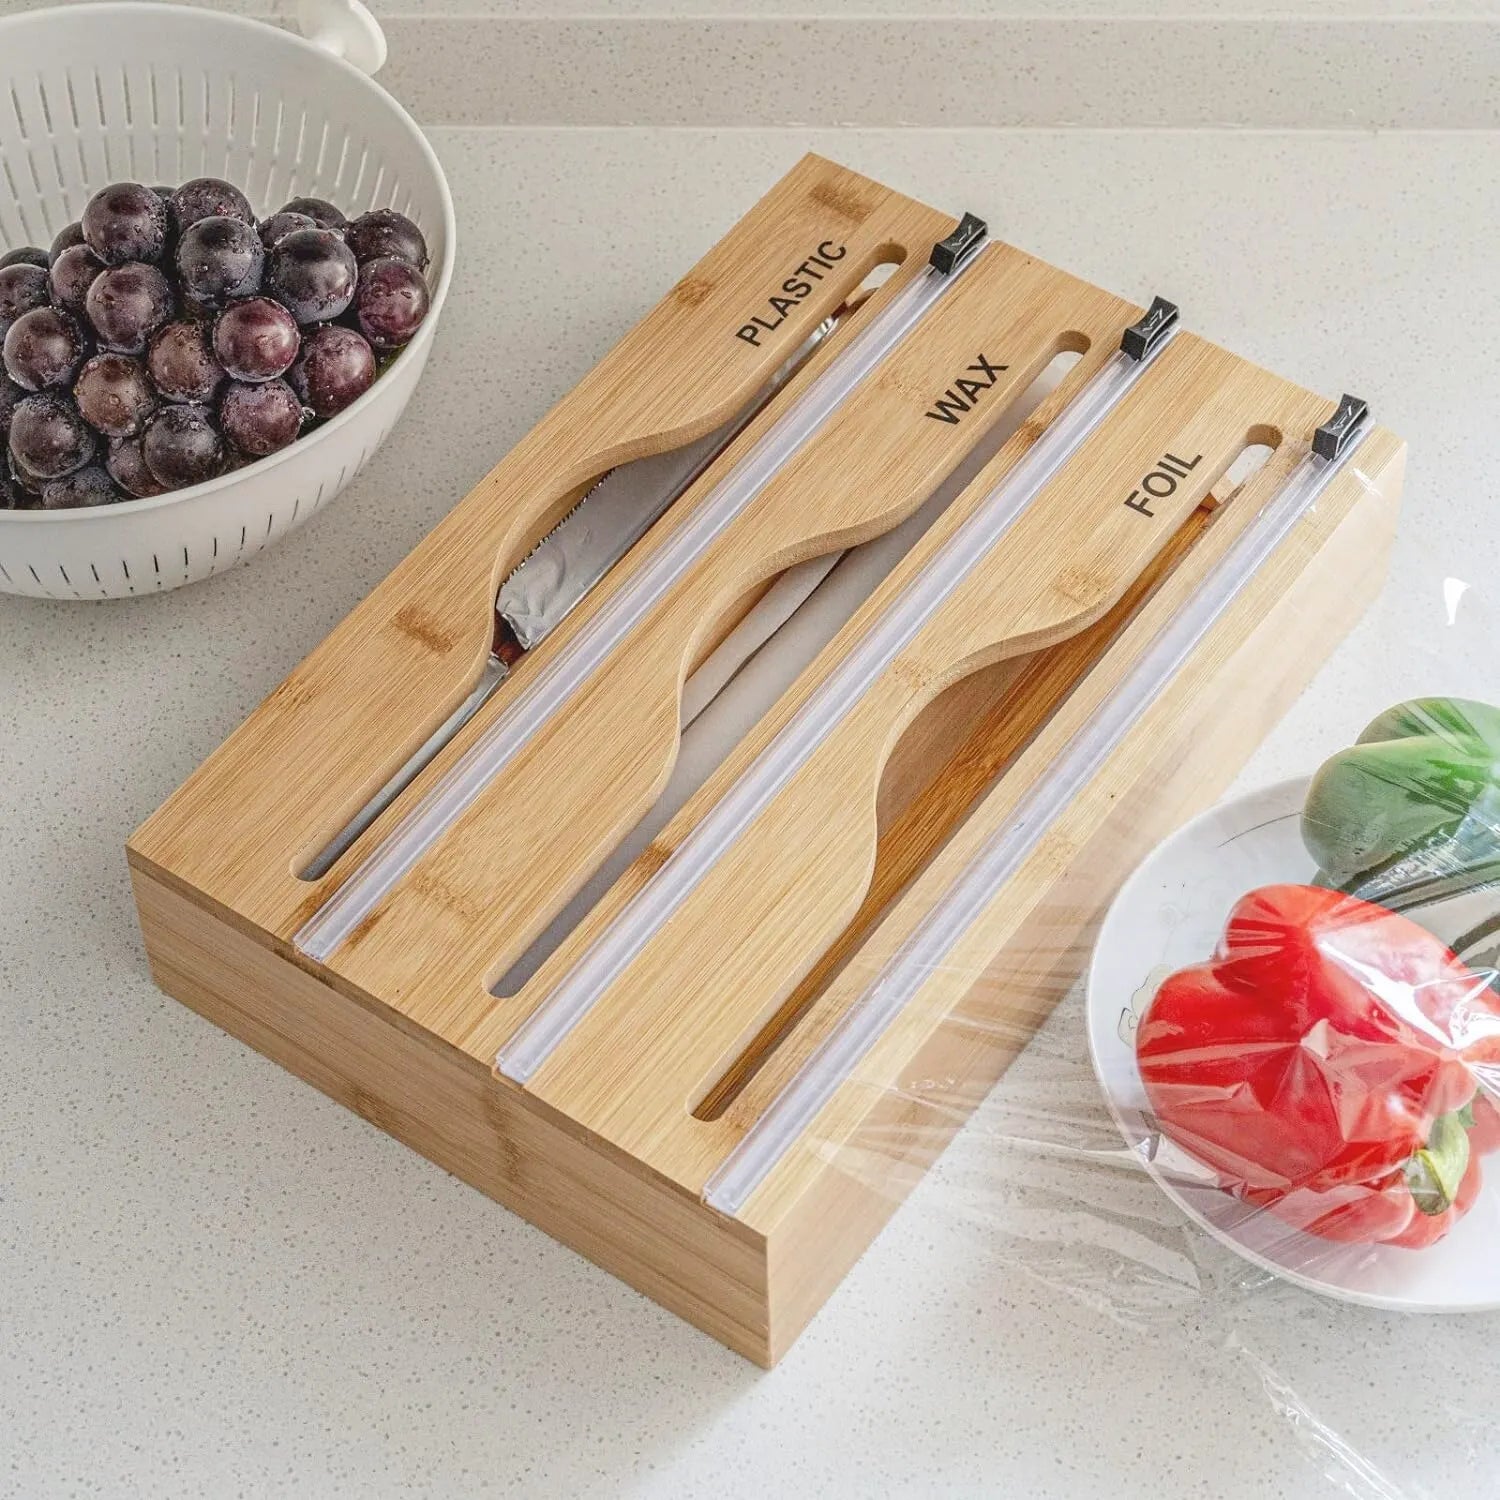 1pc Cling Film Cutter Minimalist Wall Mounted Wooden Kitchenware Multi Compartment Multi Layer Hidden Scratchers Two Way Cutter